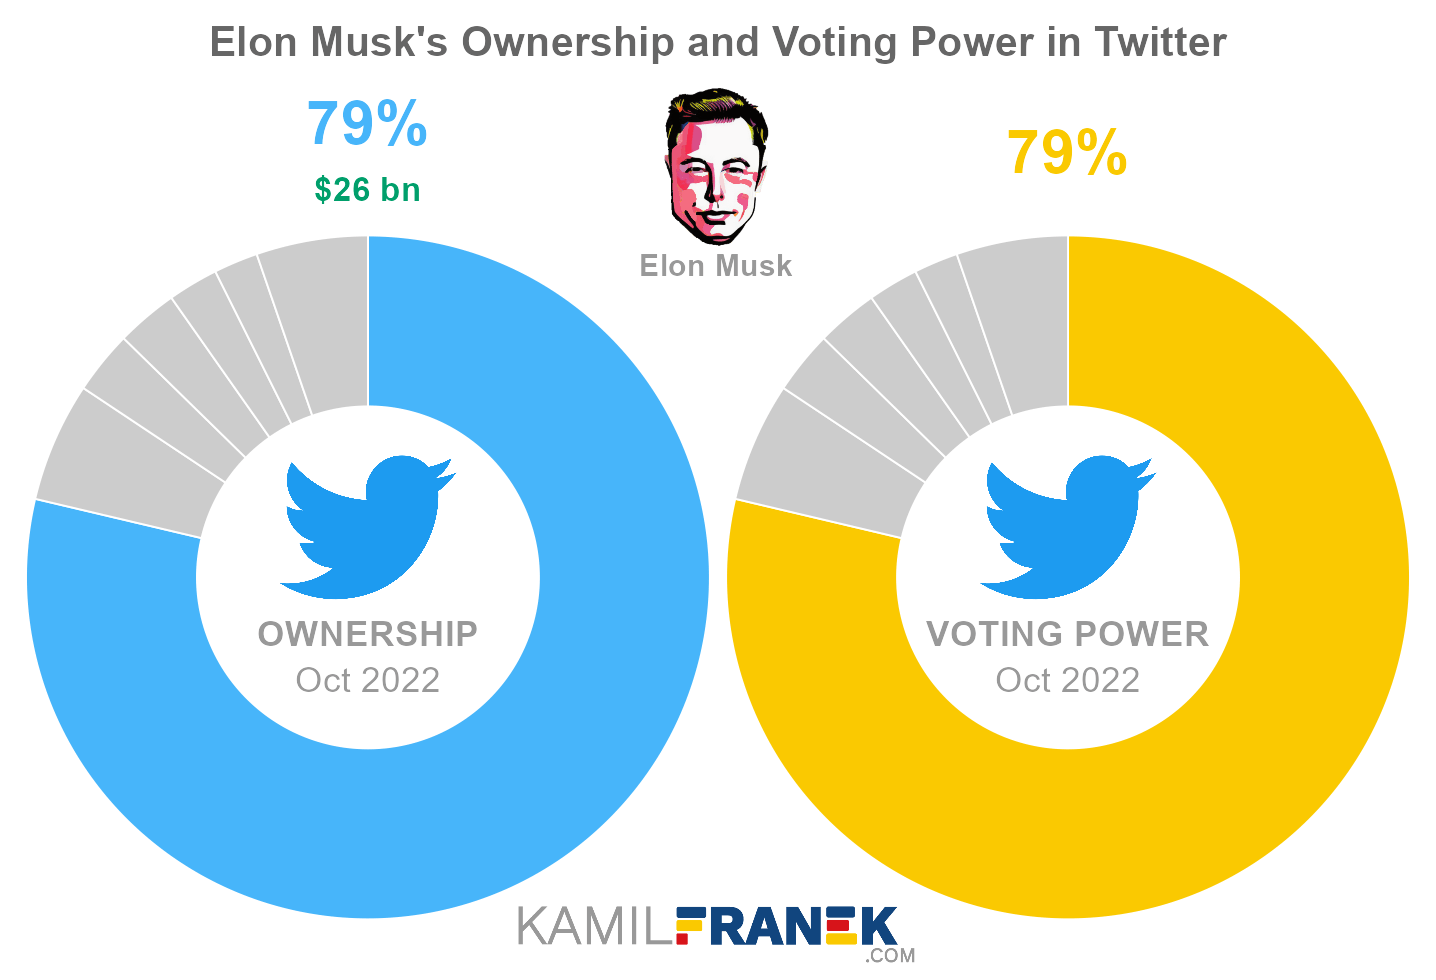 Elon Musk's share ownership and voting power in Twitter (chart)